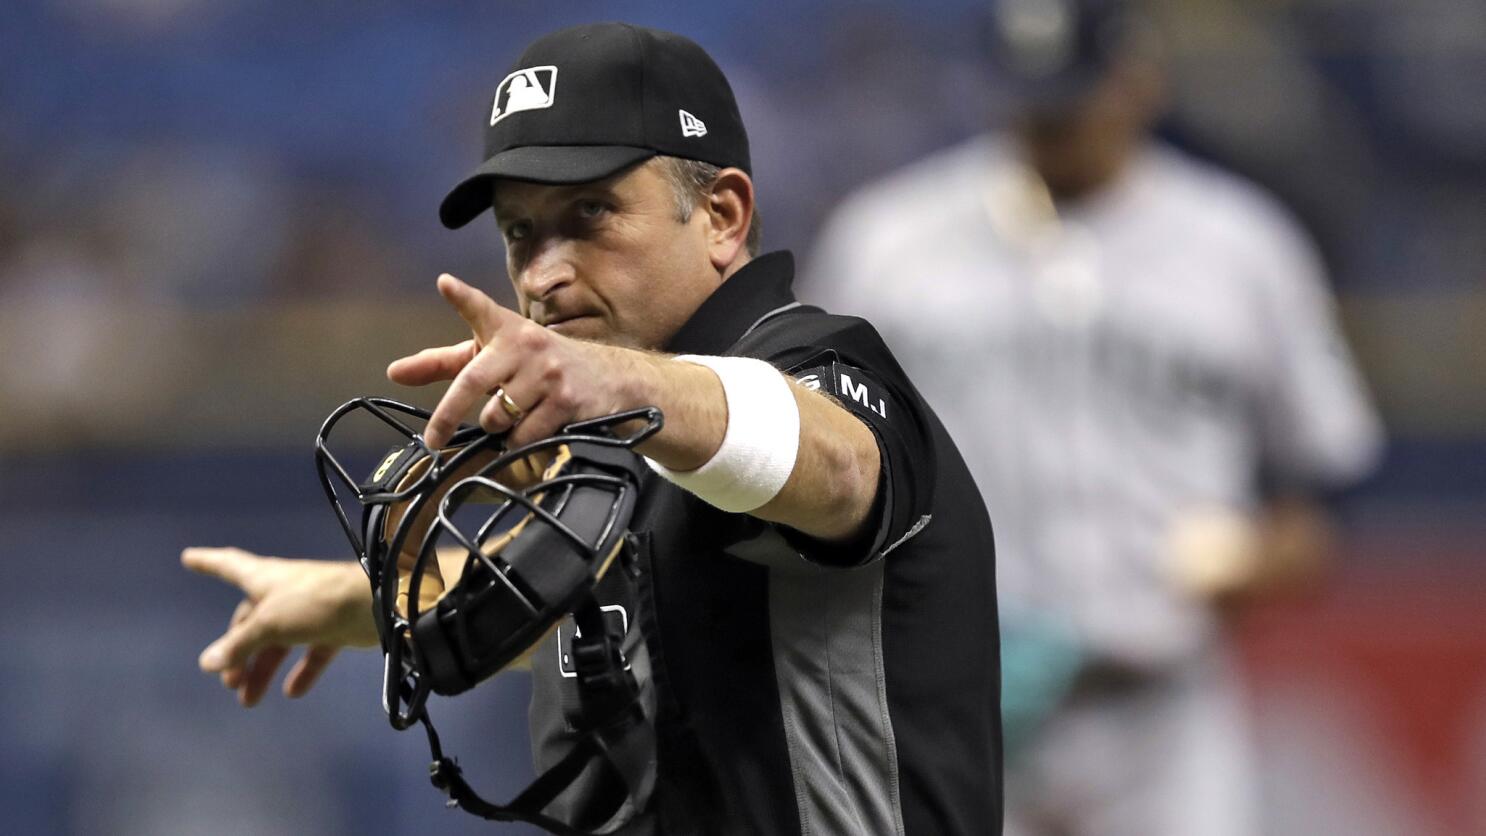 MLB's Worst Umpire Had a Dreadful Performance in Return to Job